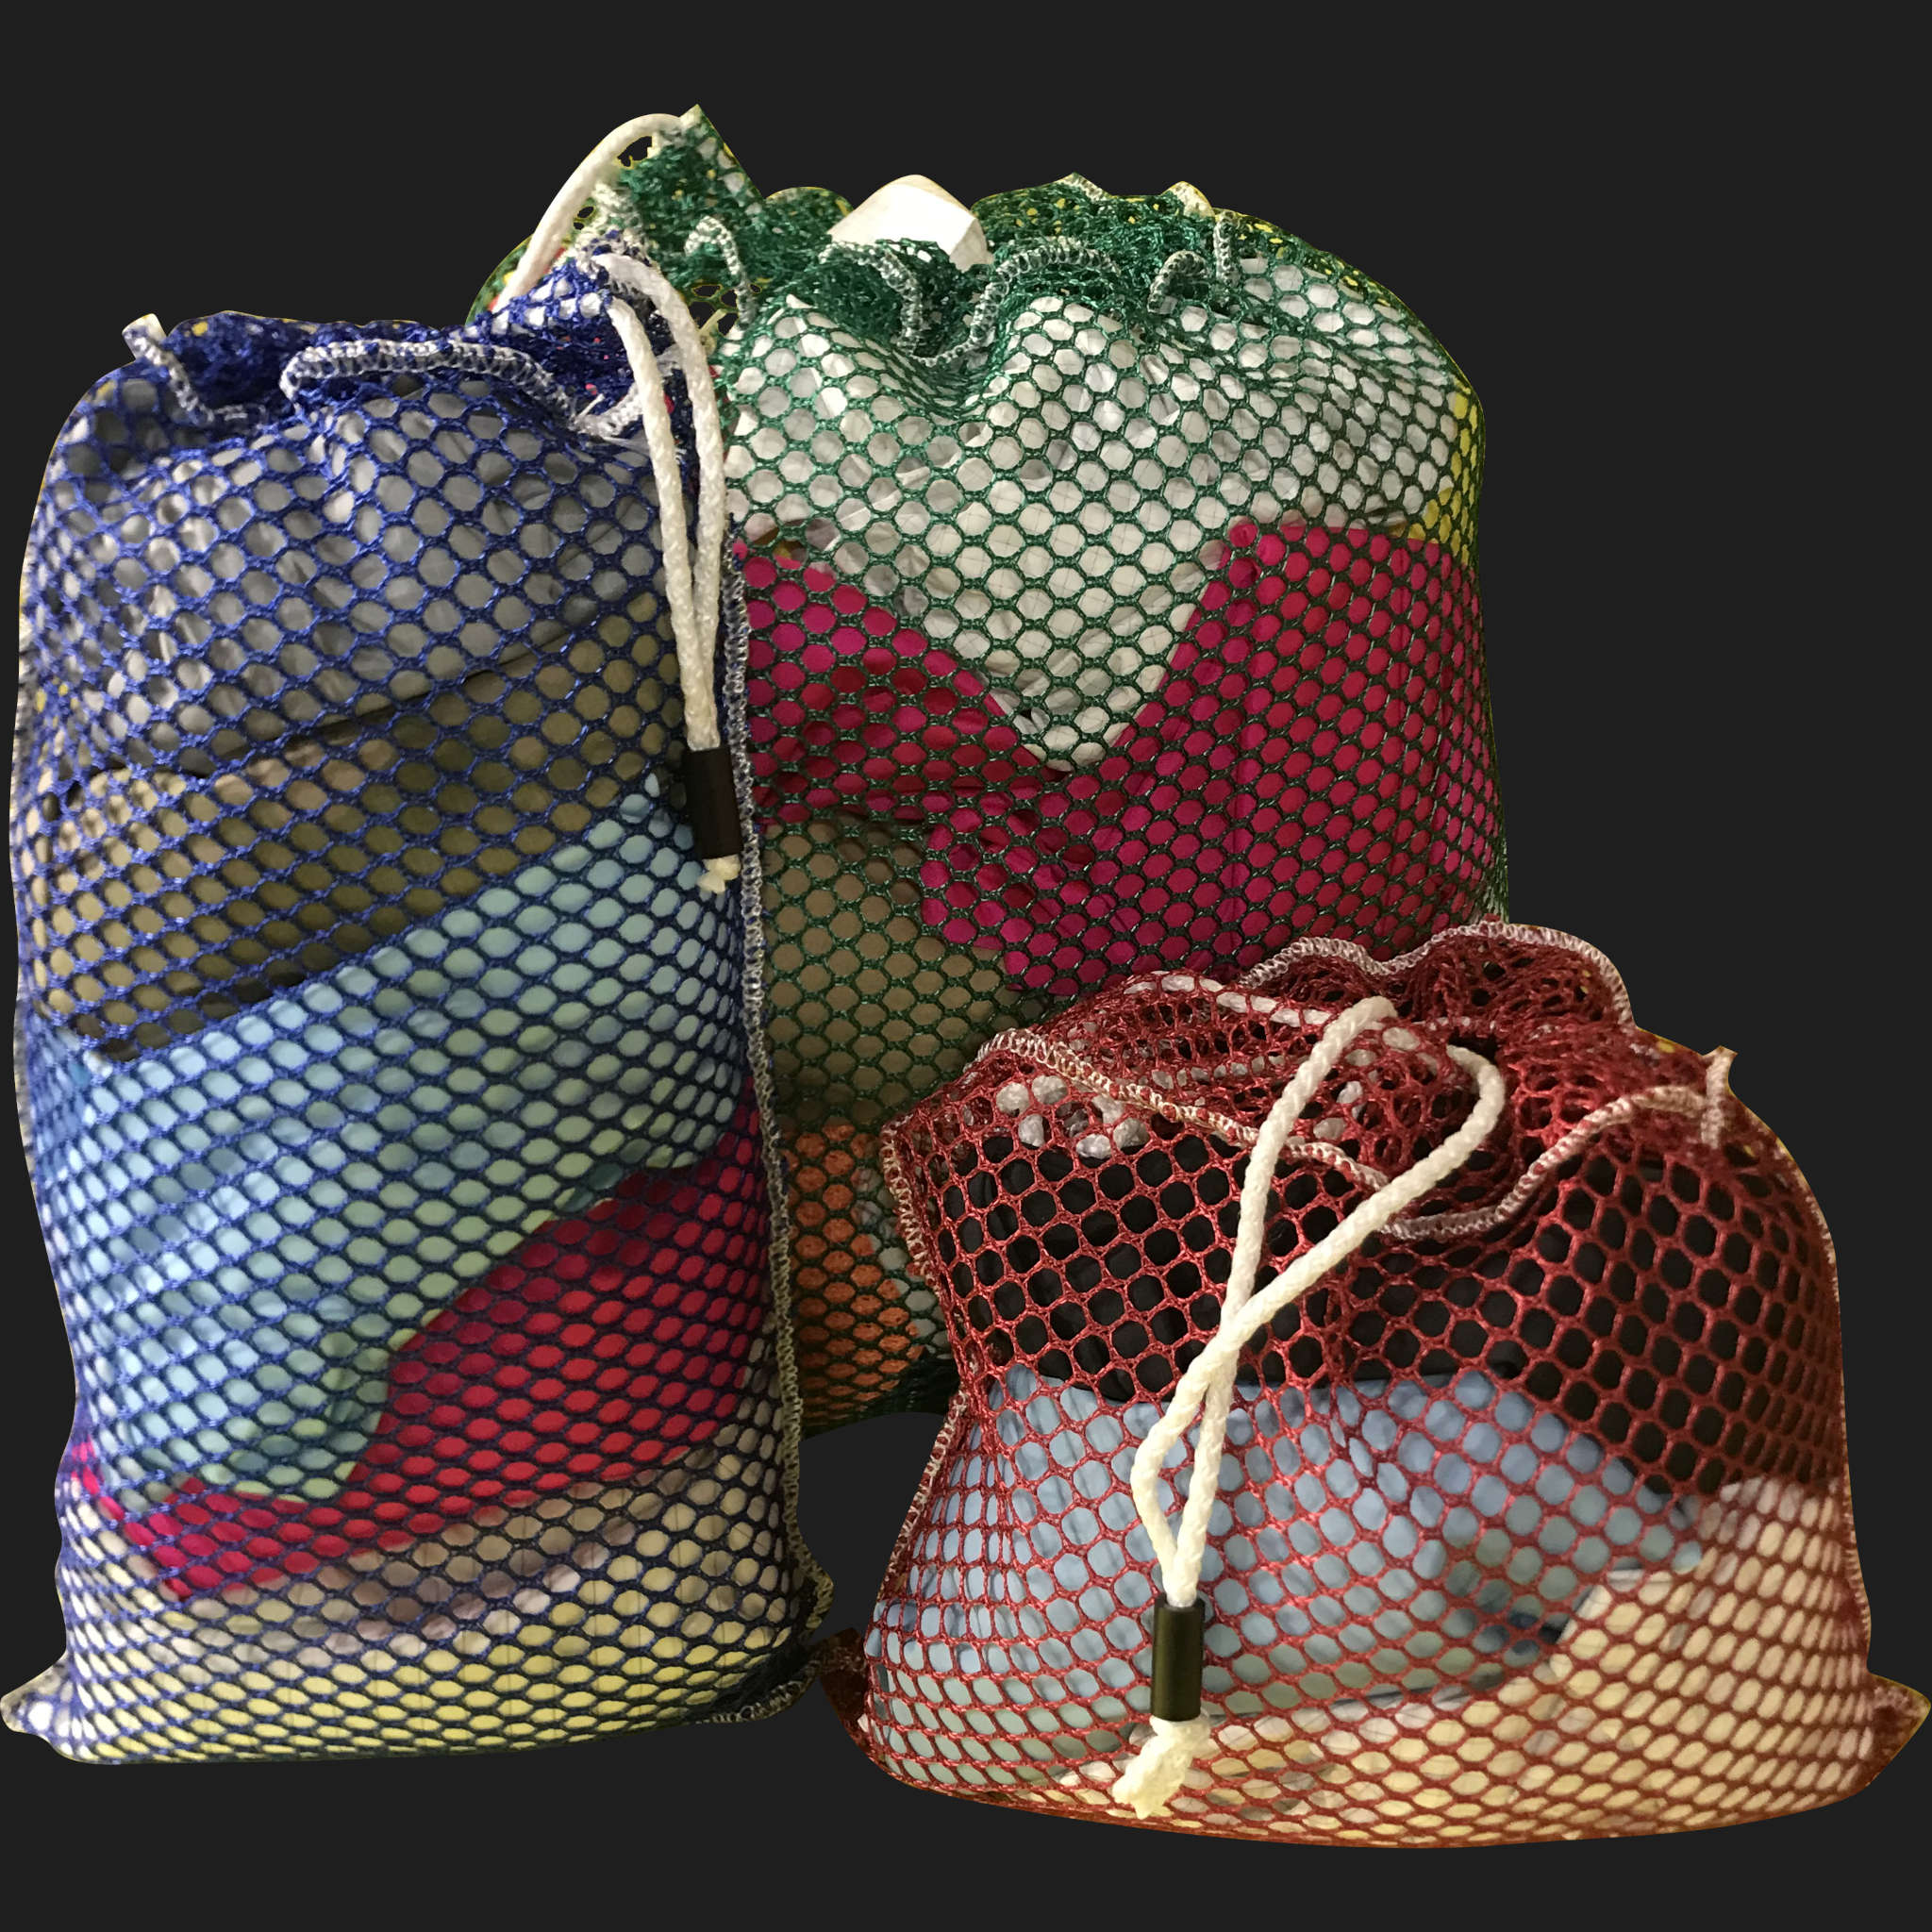 28" x 42" Customized Mesh-Net-Laundry Bags Heavy Duty with Cord and barrellock closure